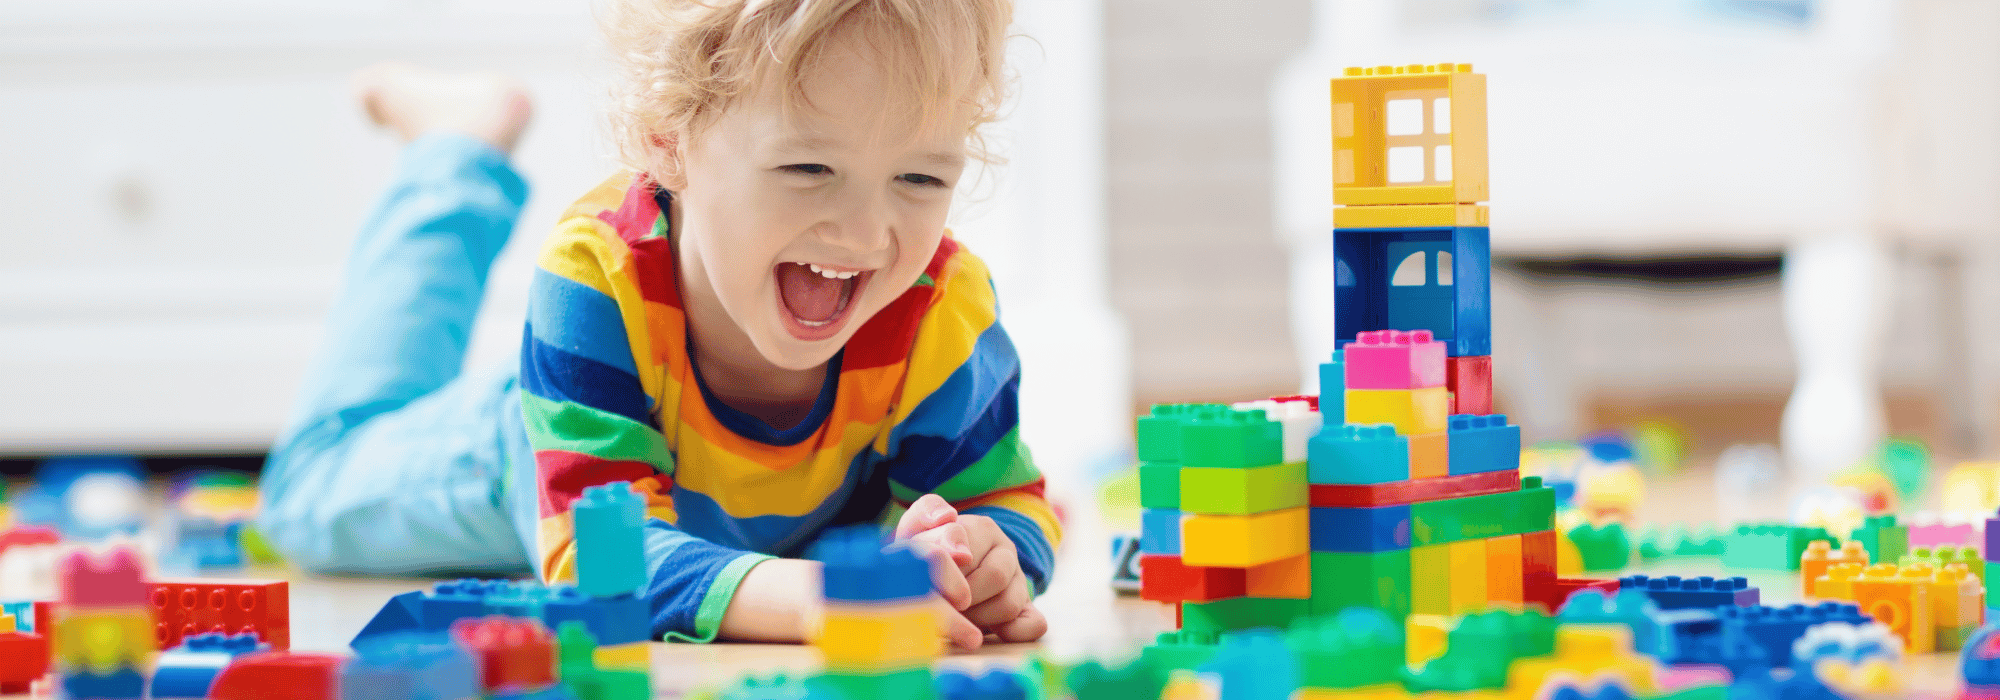 smiling child playing with blocks on the floor